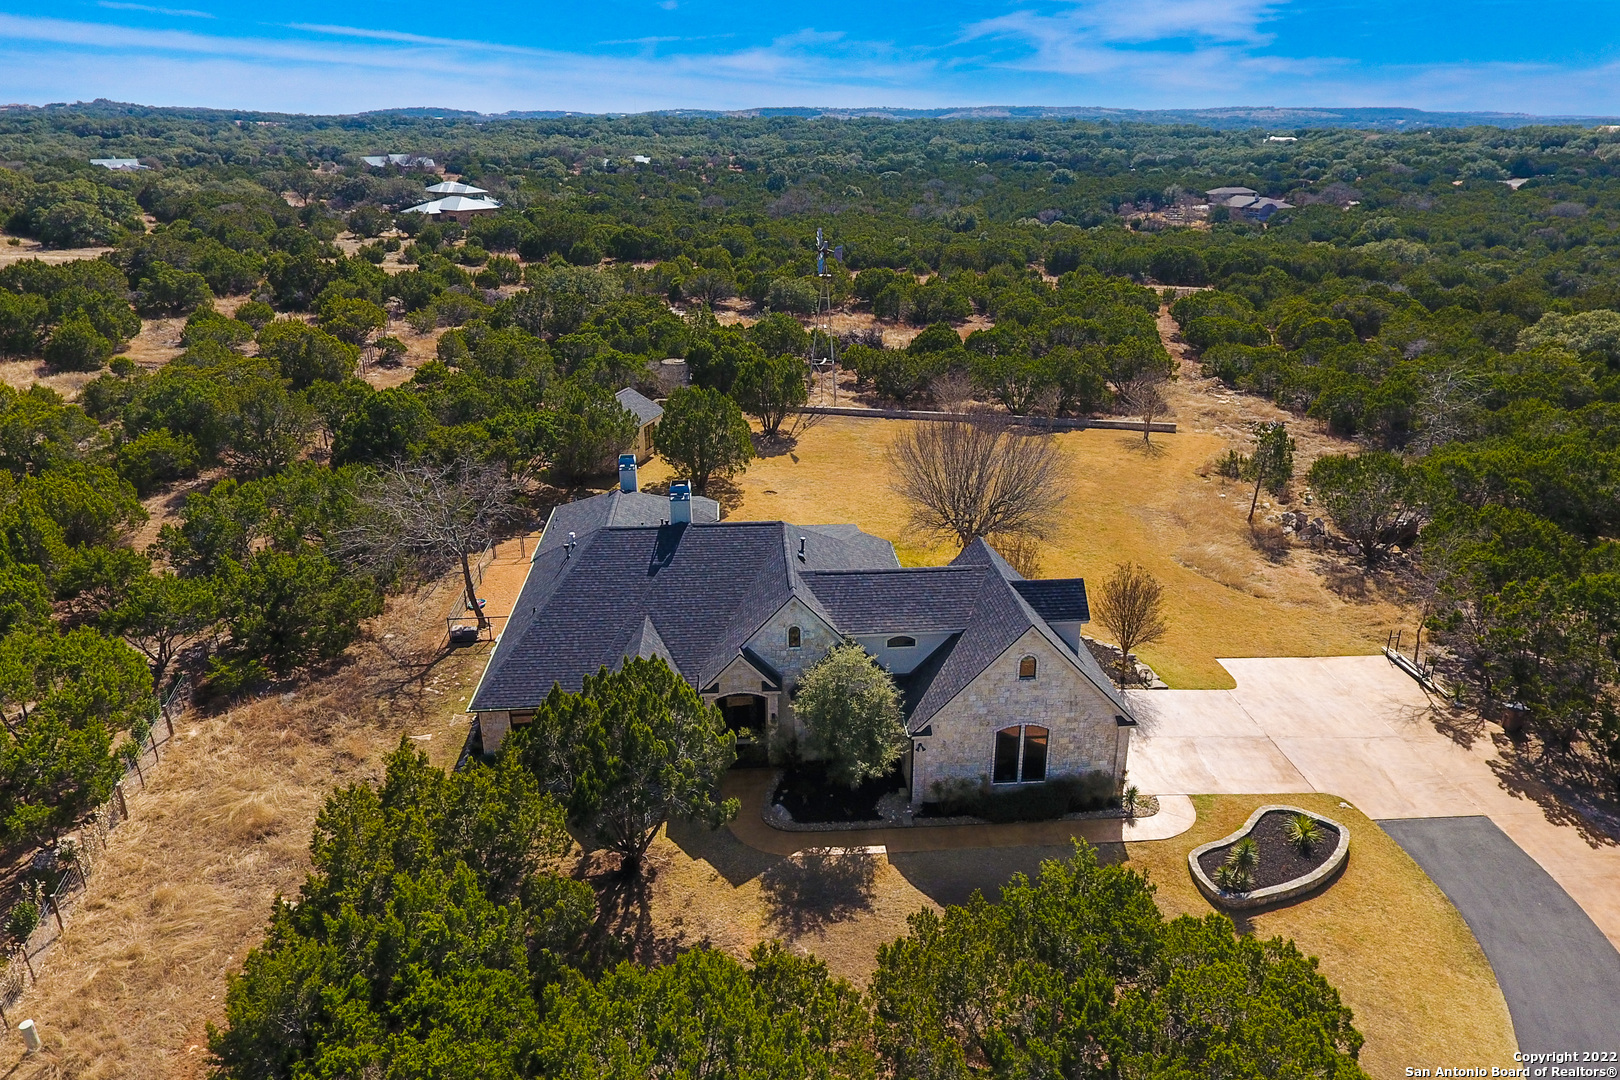 Wow! Best house in Cordillera Ranch for the money. Significantly reduced in price. Take a look at this completely remodeled Texas Hill Country Gem located in the award winning, gated community of Cordillera Ranch in Boerne, Texas on 4 private acres.   This custom home with 3,435 SF has been completely updated by the current owner over the past two years.  There is a 575 SF private, fully functional apartment/mother-in law suite above the garage that offers so many options (college student, mother-in law, guests, etc.).  The list of renovations is too long to mention, but some of them include new HVAC systems, new black high-end composition roof, extensive hardwood flooring, custom brick ARTO tiles in living room, all new Pella windows, all new custom cabinets throughout, stainless steel kitchen sink w/ copper finish, gas range, antique sliding barn doors, double sliding Pella doors leading to back covered patio that also offers custom tile flooring. The kitchen island is massive with cabinets underneath on both sides. There are custom shades in many rooms of the house. Shiplap is also installed in several areas of the home. The expansive, irrigated backyard leads to miles of hiking trails in the back of the property. In the backyard is a 12x20 (approx.) stone building with air conditioning, electrical, and plumbing that could be used for a variety of applications. It is not finished out on the inside. Located at the end of a quiet cul-de-sac, the gated driveway was recently stained and sealed.  If you are in the market for a stunning & recently renovated custom home in one of the finest Hill Country communities, you need to put this one on your list! Refrigerator does convey.